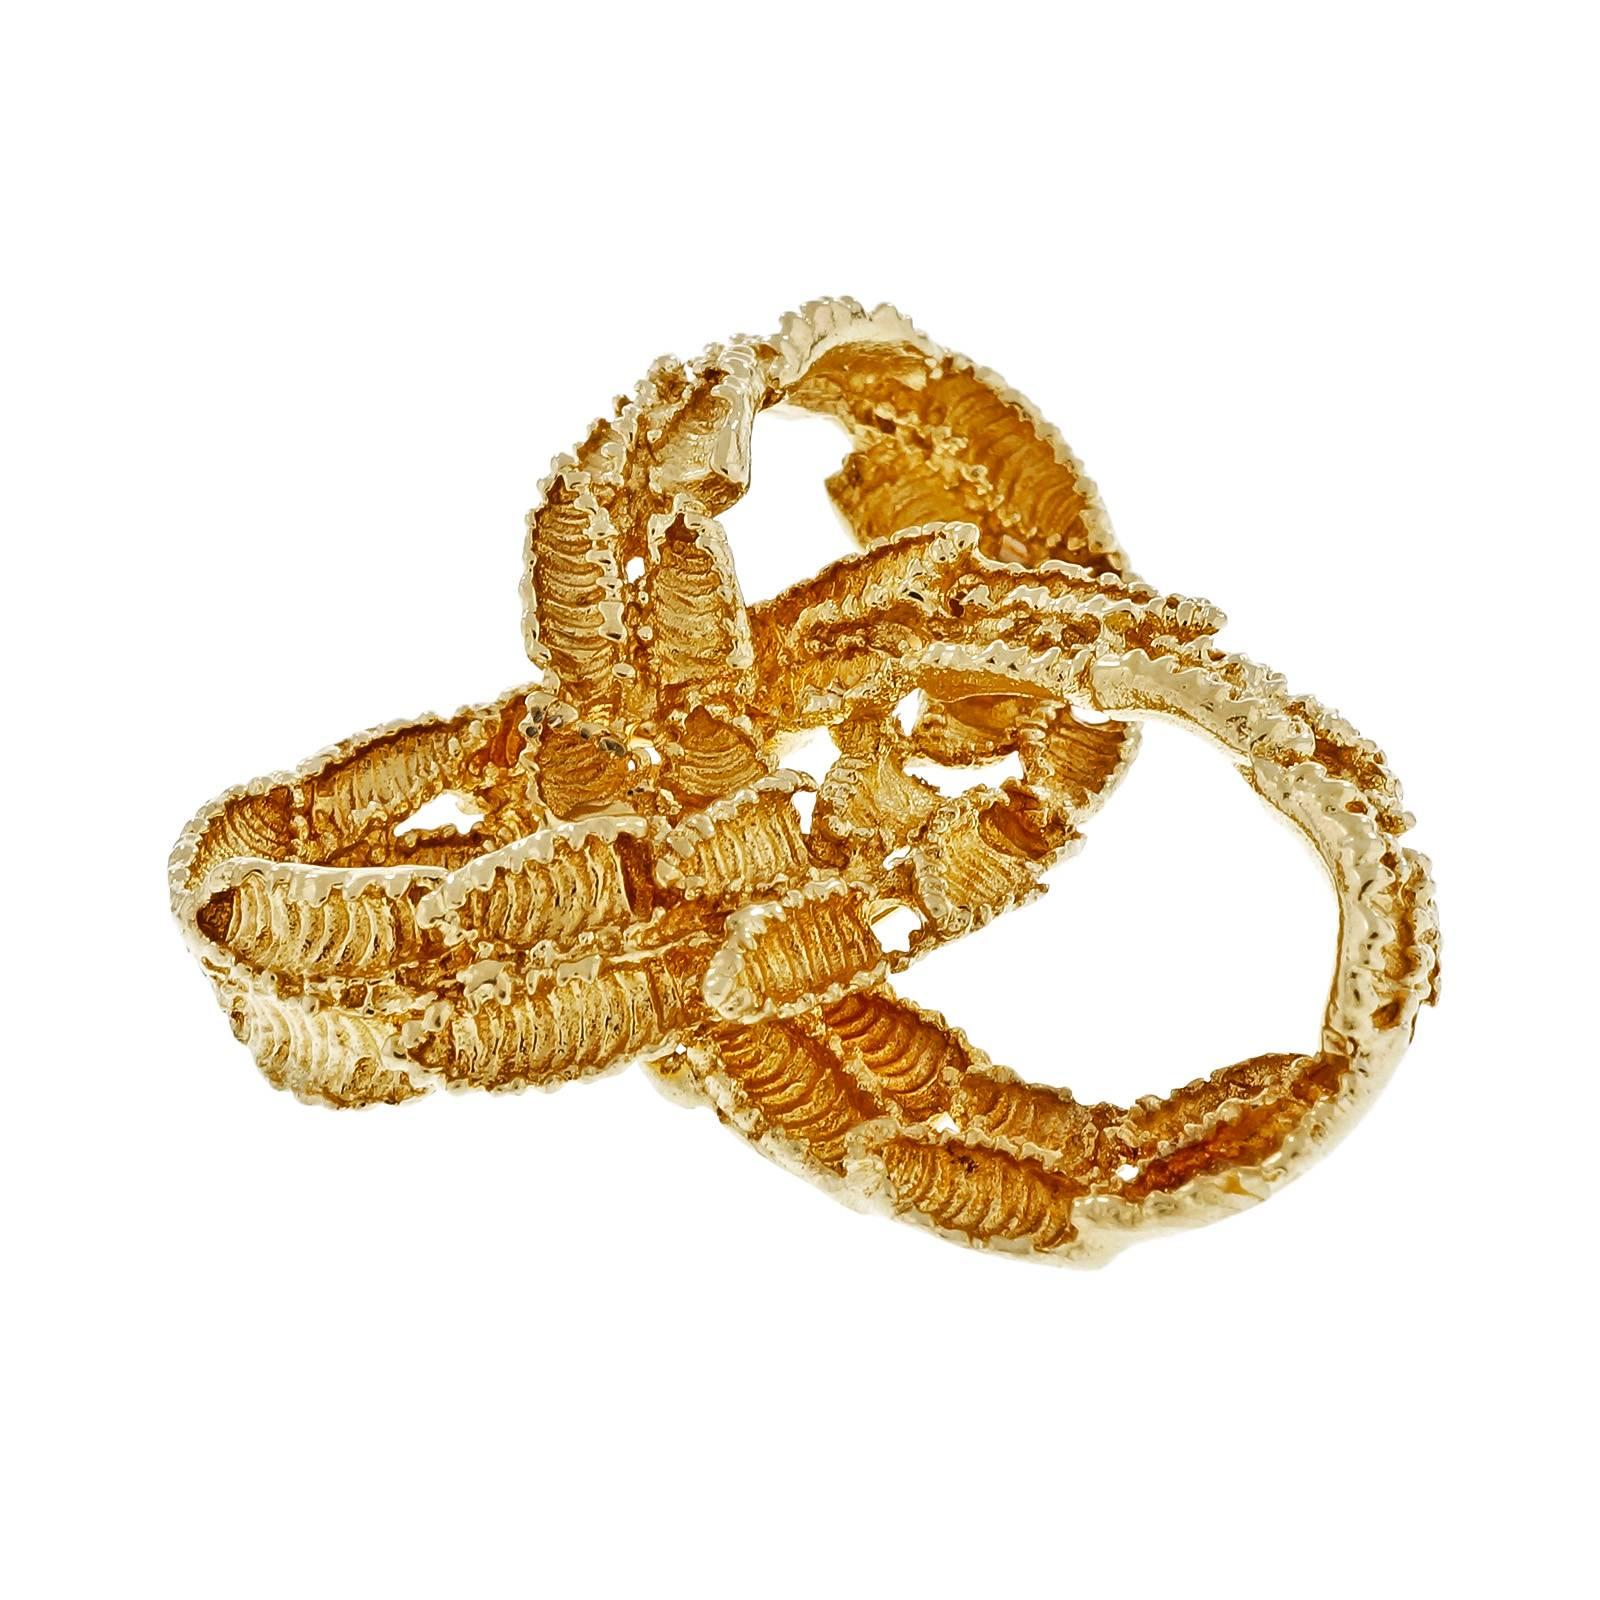 Tiffany & Co textured vintage 1960's Infinity Knot Brooch in solid 18k yellow gold.

18k yellow gold
Tested: 18k
Hallmark: Tiffany & Co
19.1 grams
Top to bottom: 39.09mm or 1.54 inches
Width: 38.76mm or 1.53 inches
Depth: 14.15mm

